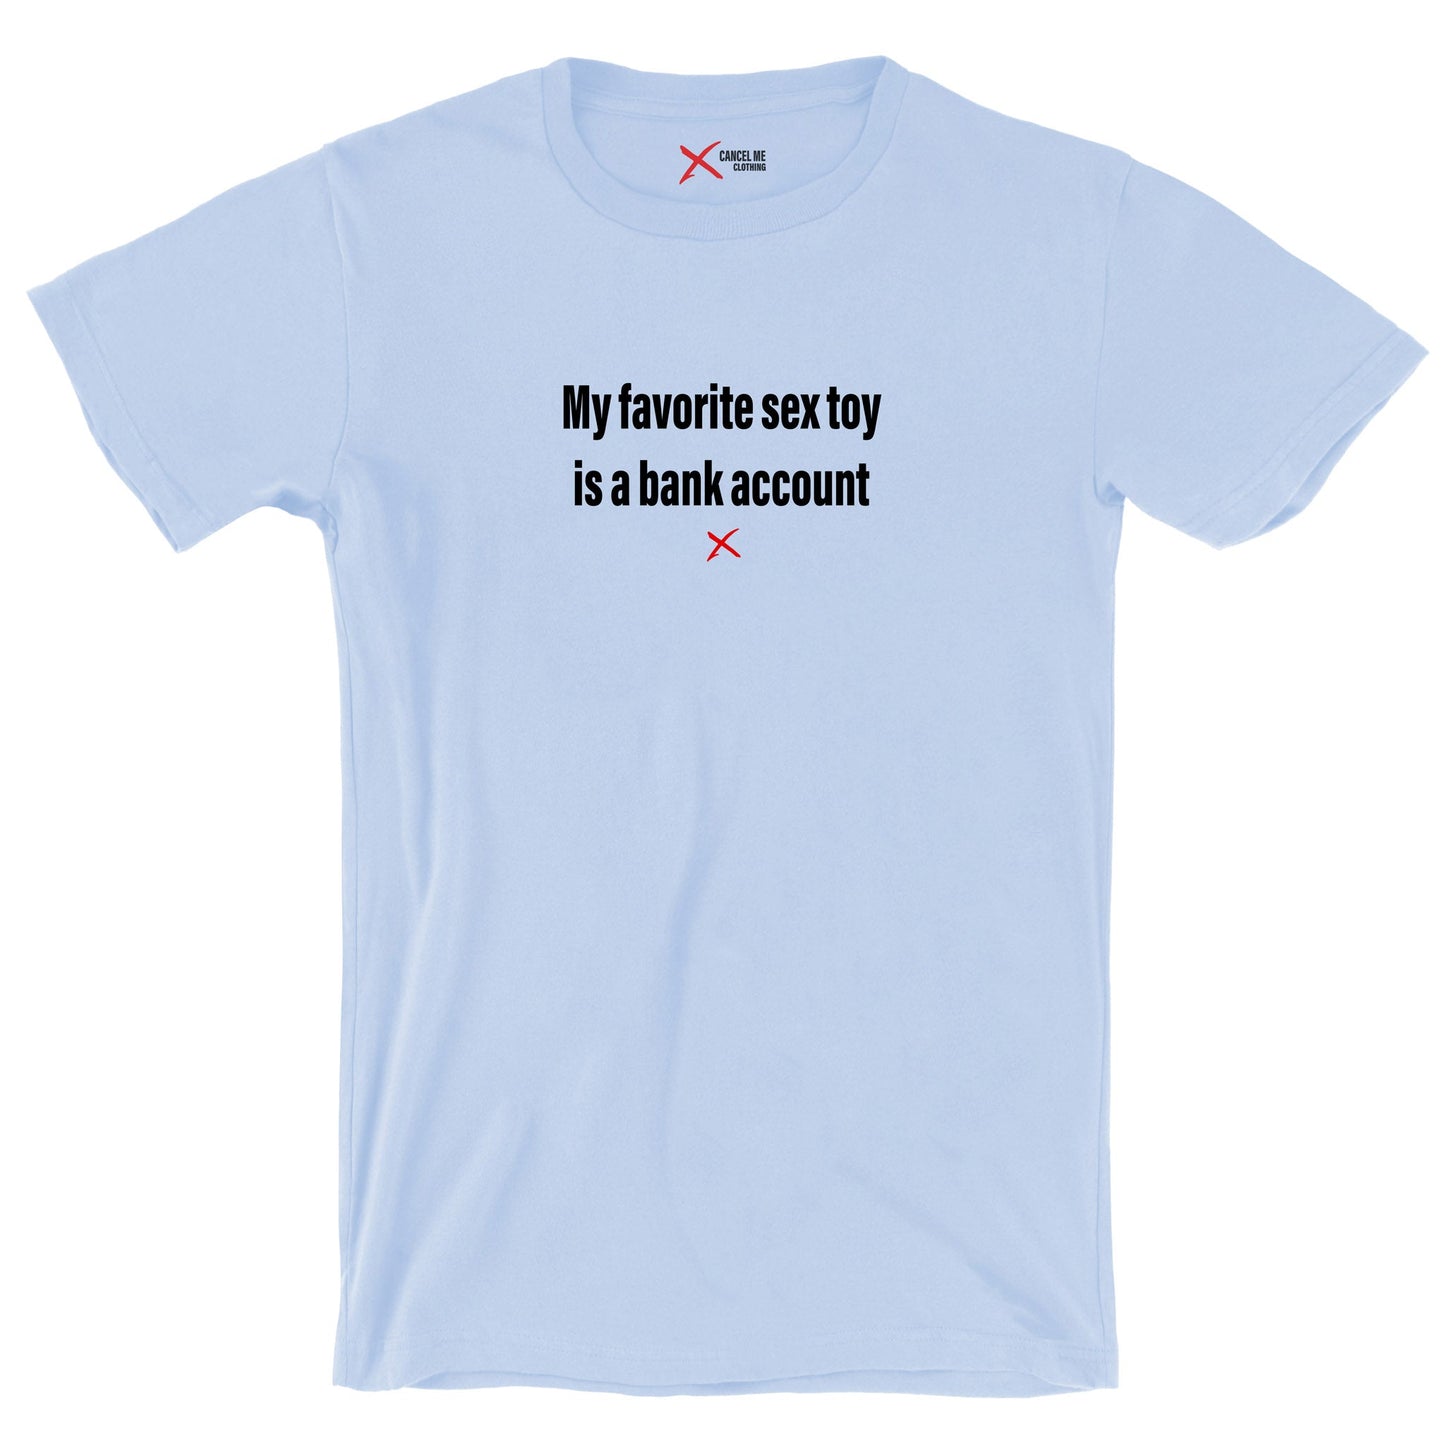 My favorite sex toy is a bank account - Shirt